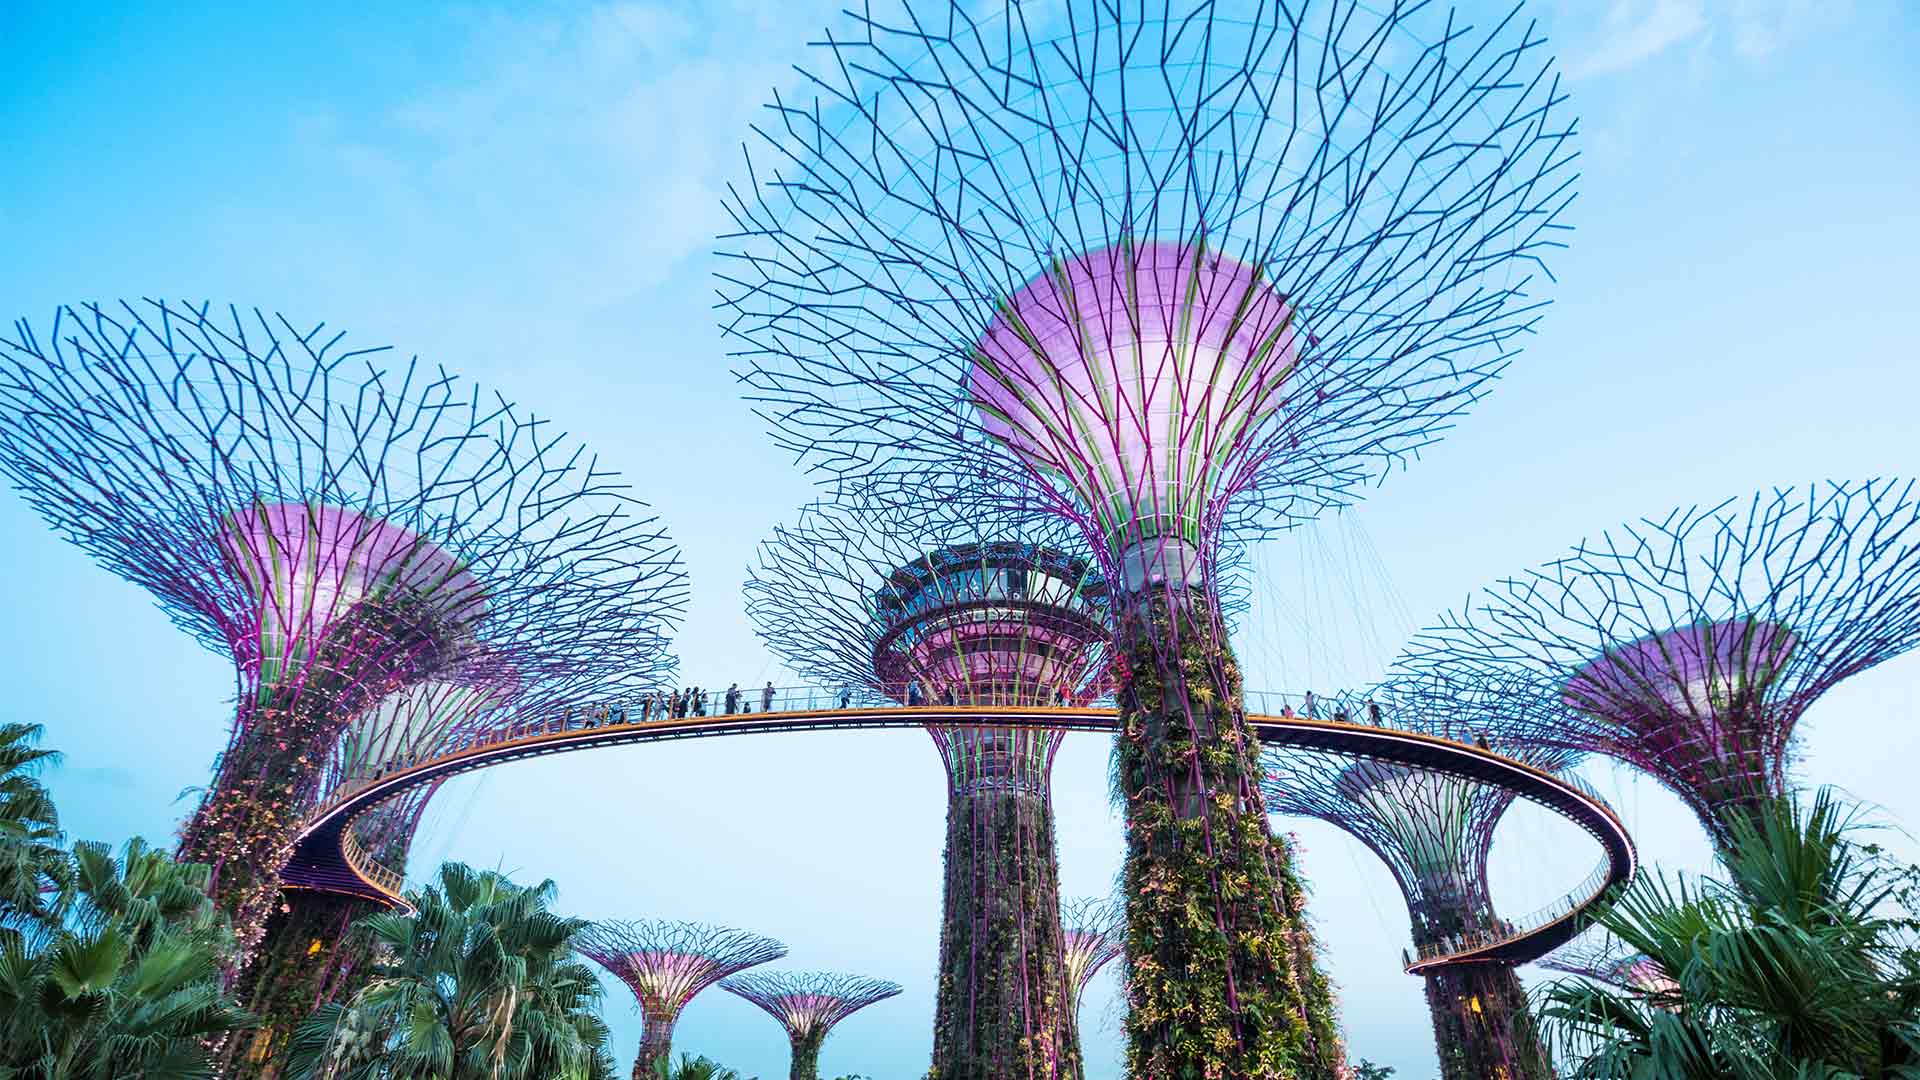 Overvie of the Supertrees at Gardens by the Bay a popular attraction in Singapore